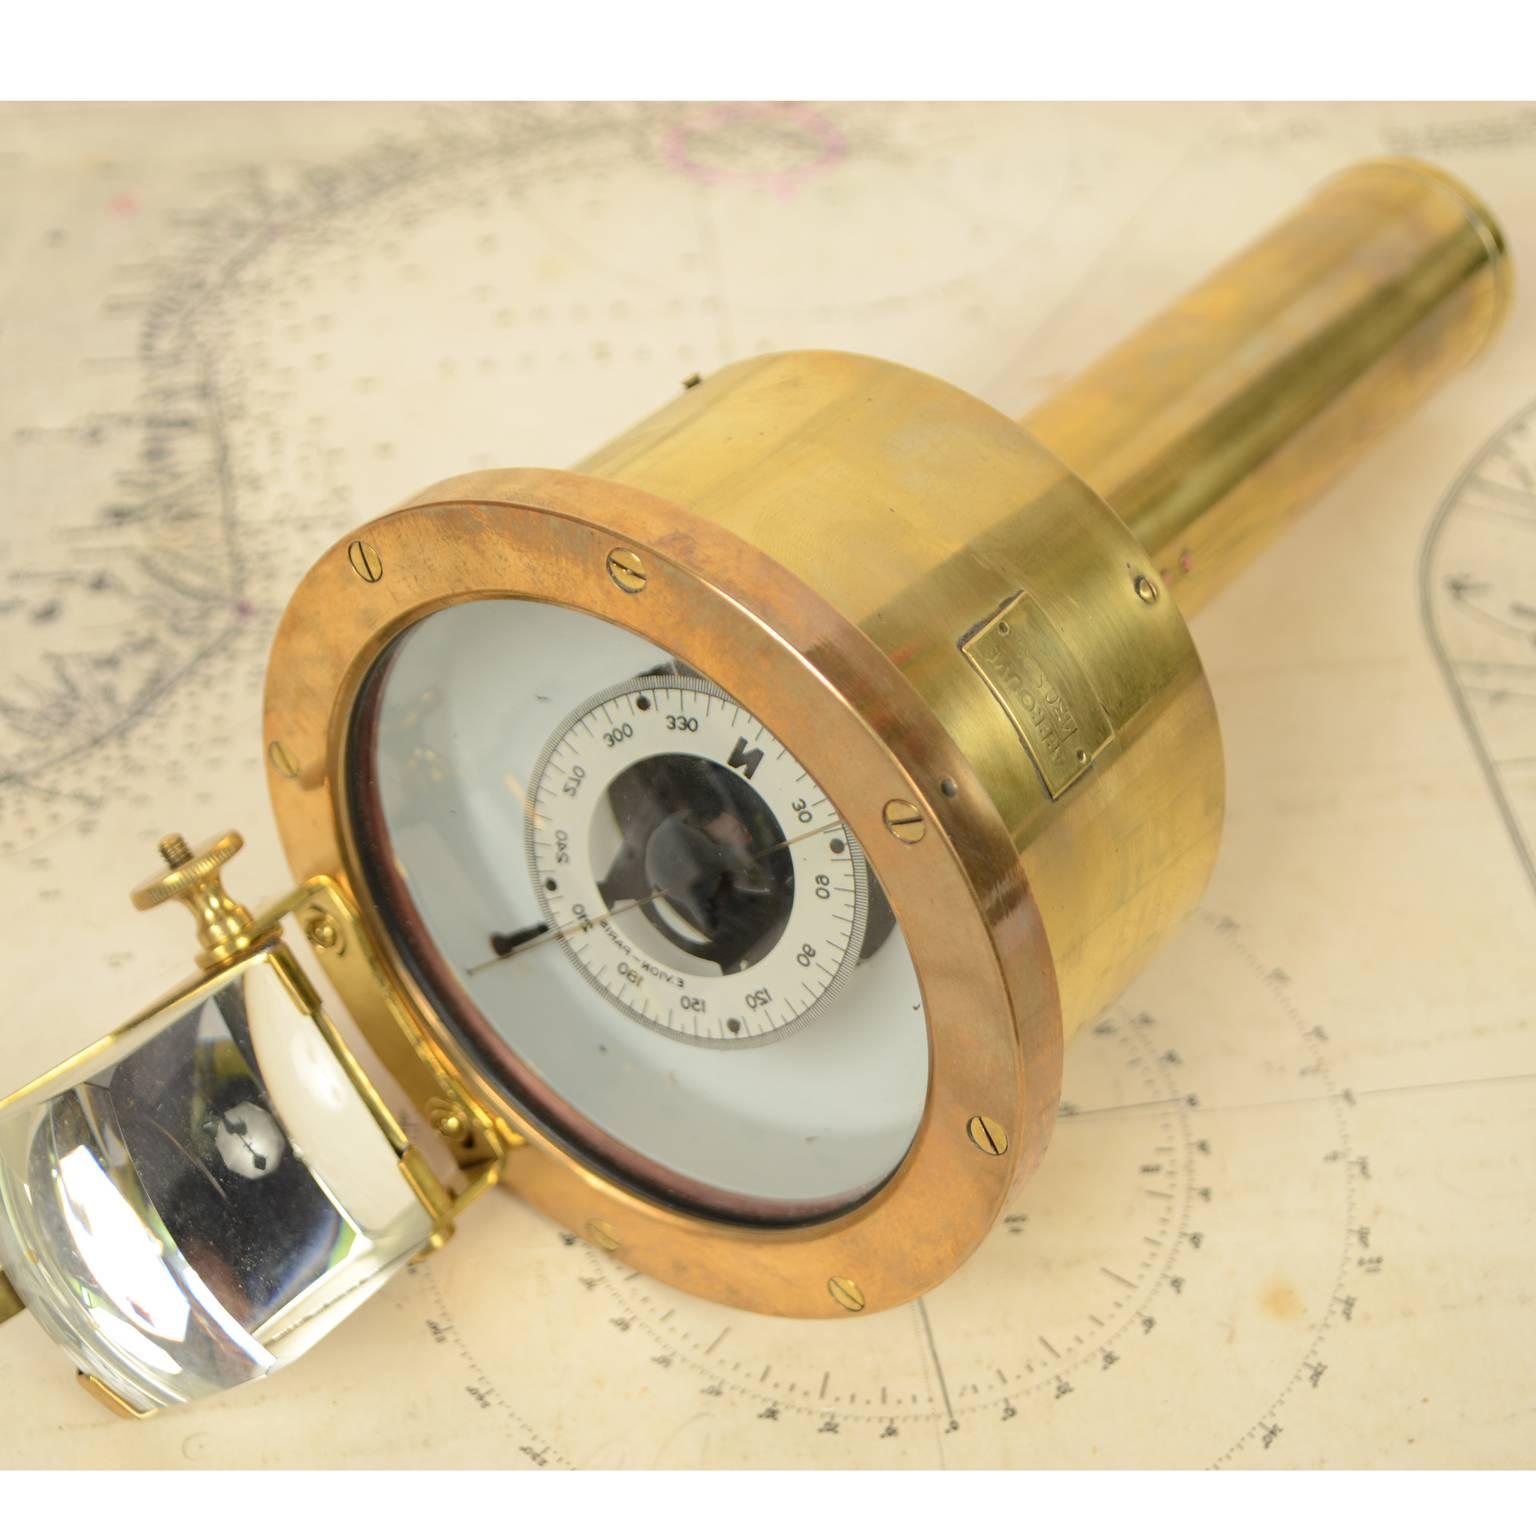 Nautical Brass Magnetic Compass with Original Box by E. Vion Paris, Early 1900 For Sale 3